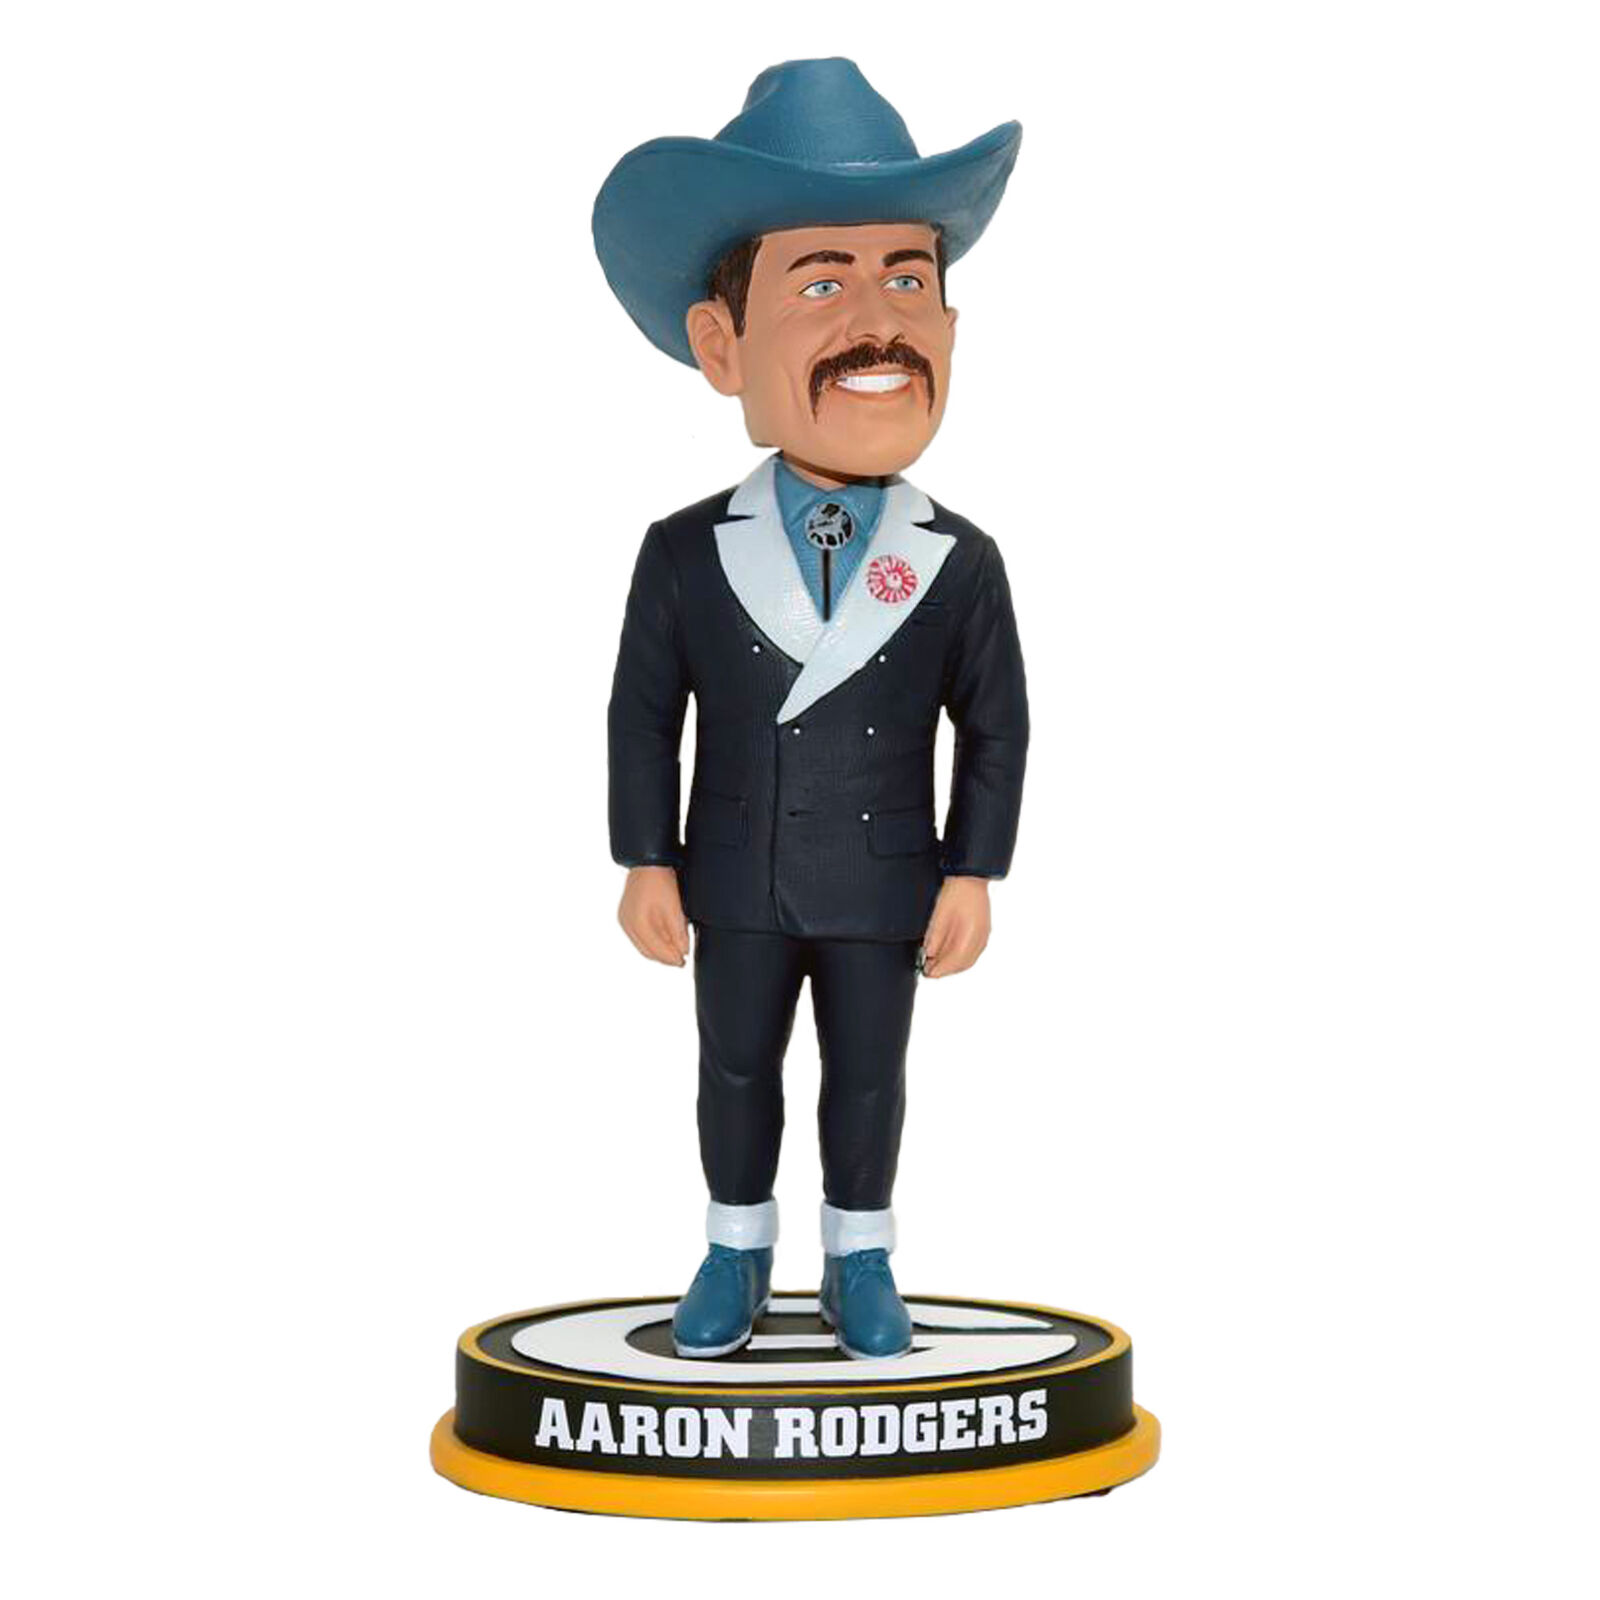 Aaron Rodgers (green Bay Packers) Canadian Tuxedo Exclusive Nfl Bobblehead #/360